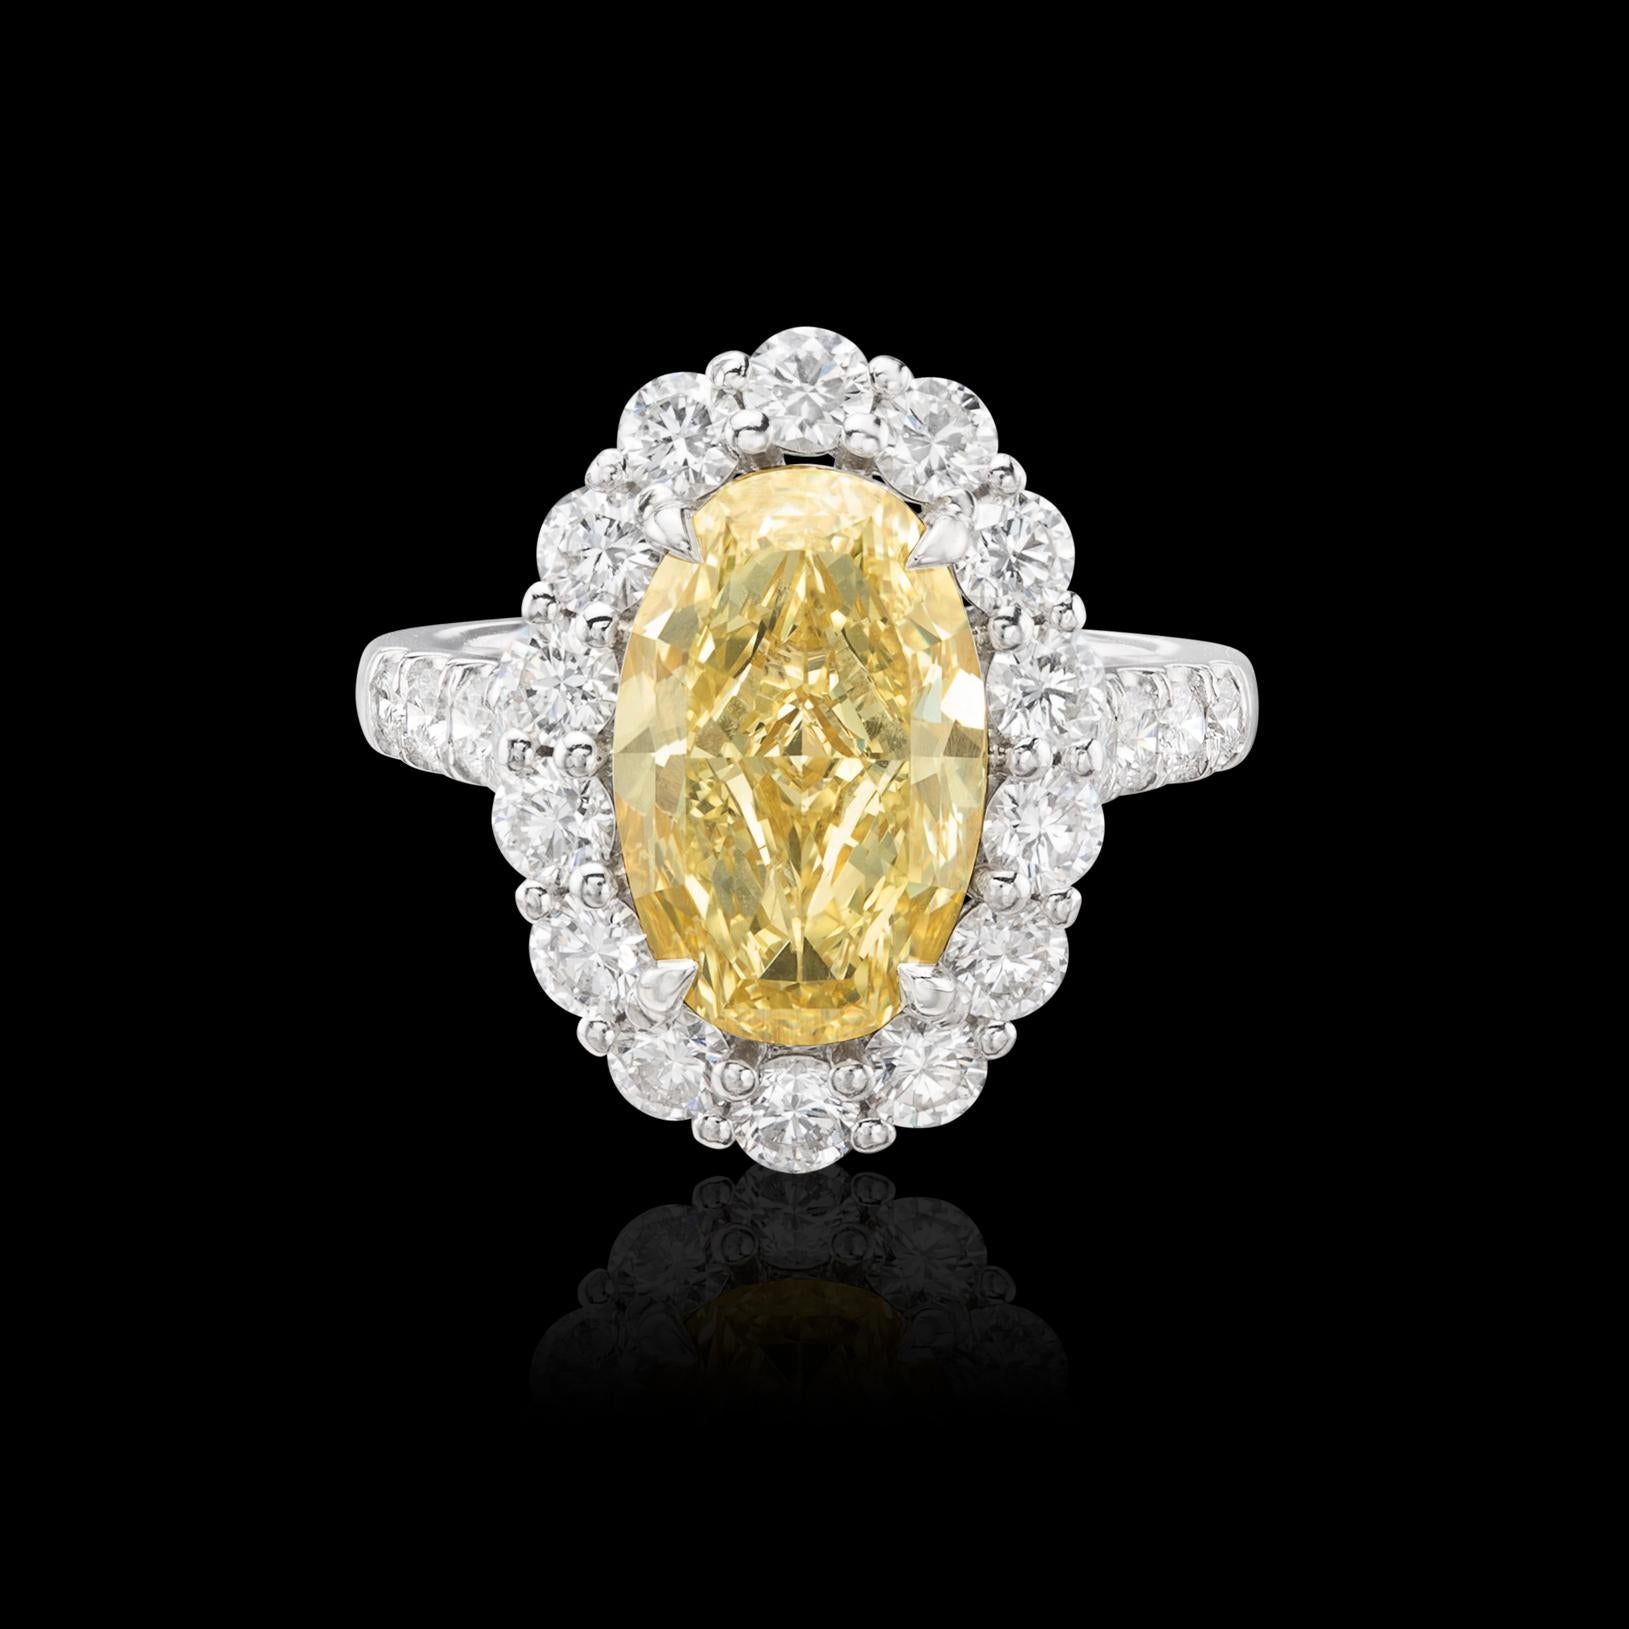 Beautiful platinum engagement ring in the Princess Di style! The 4.15-carat oval-cut fancy light yellow/SI1 diamond is set in 18k gold, and surrounded by 22 round brilliant-cut diamonds, continued down the shoulders, with a total weight of 5.91